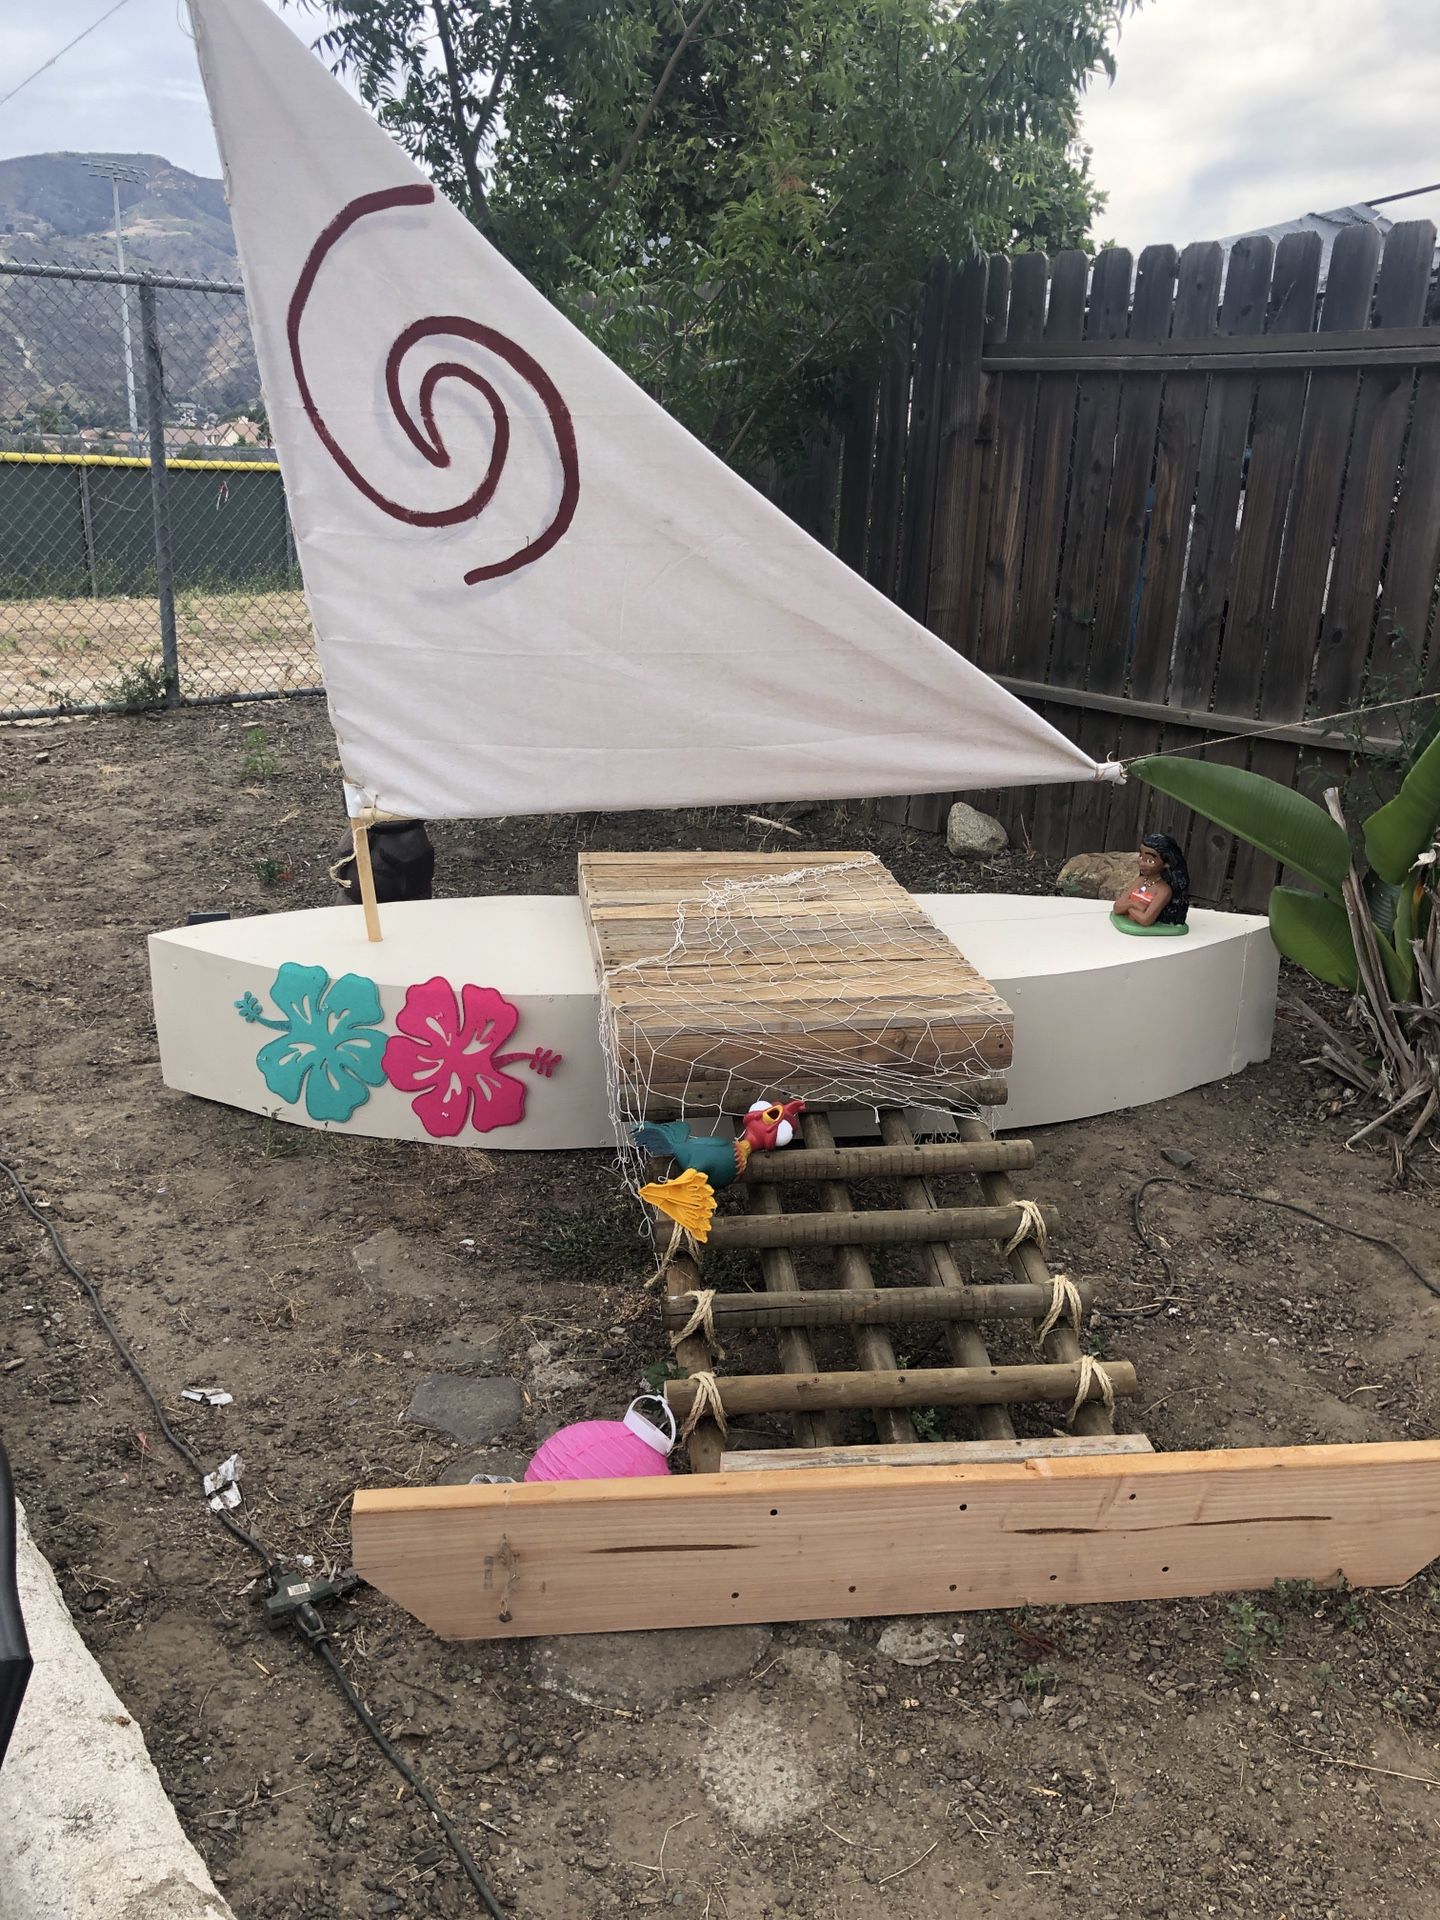 Moana boat for party pictures